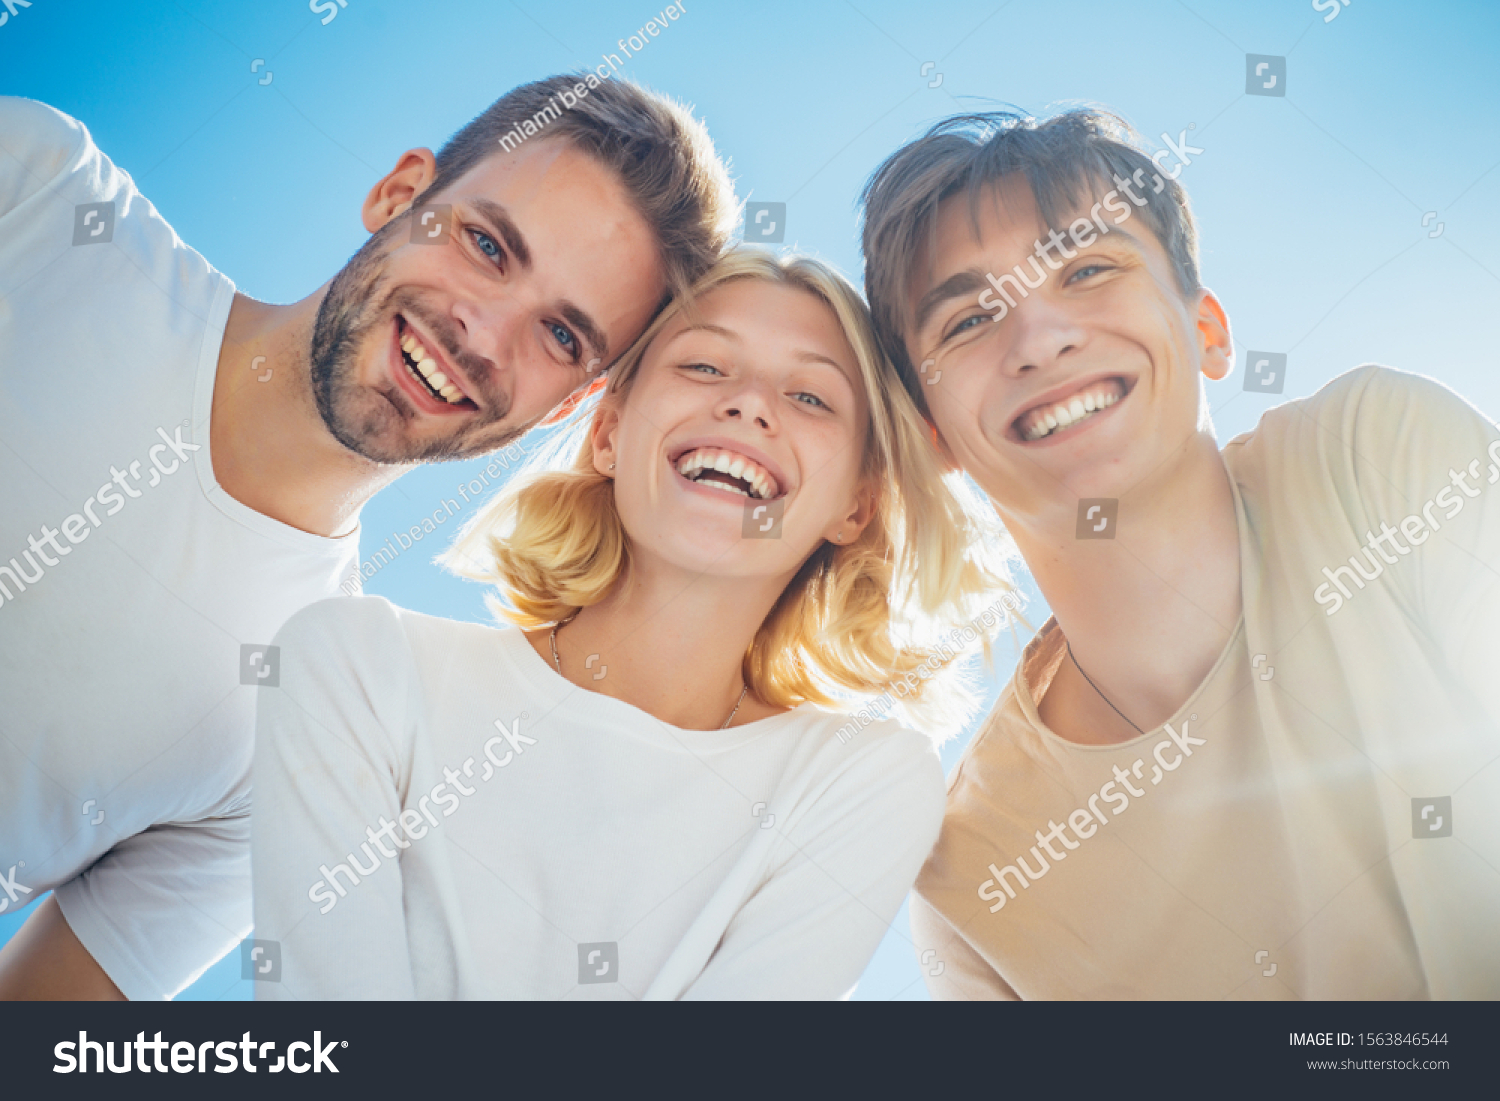 Happy group young people. Cheerful smiling happy best friends walking outdoor together and having great time. Sweet memories about summer holidays. Leisure activity and friendship concept #1563846544